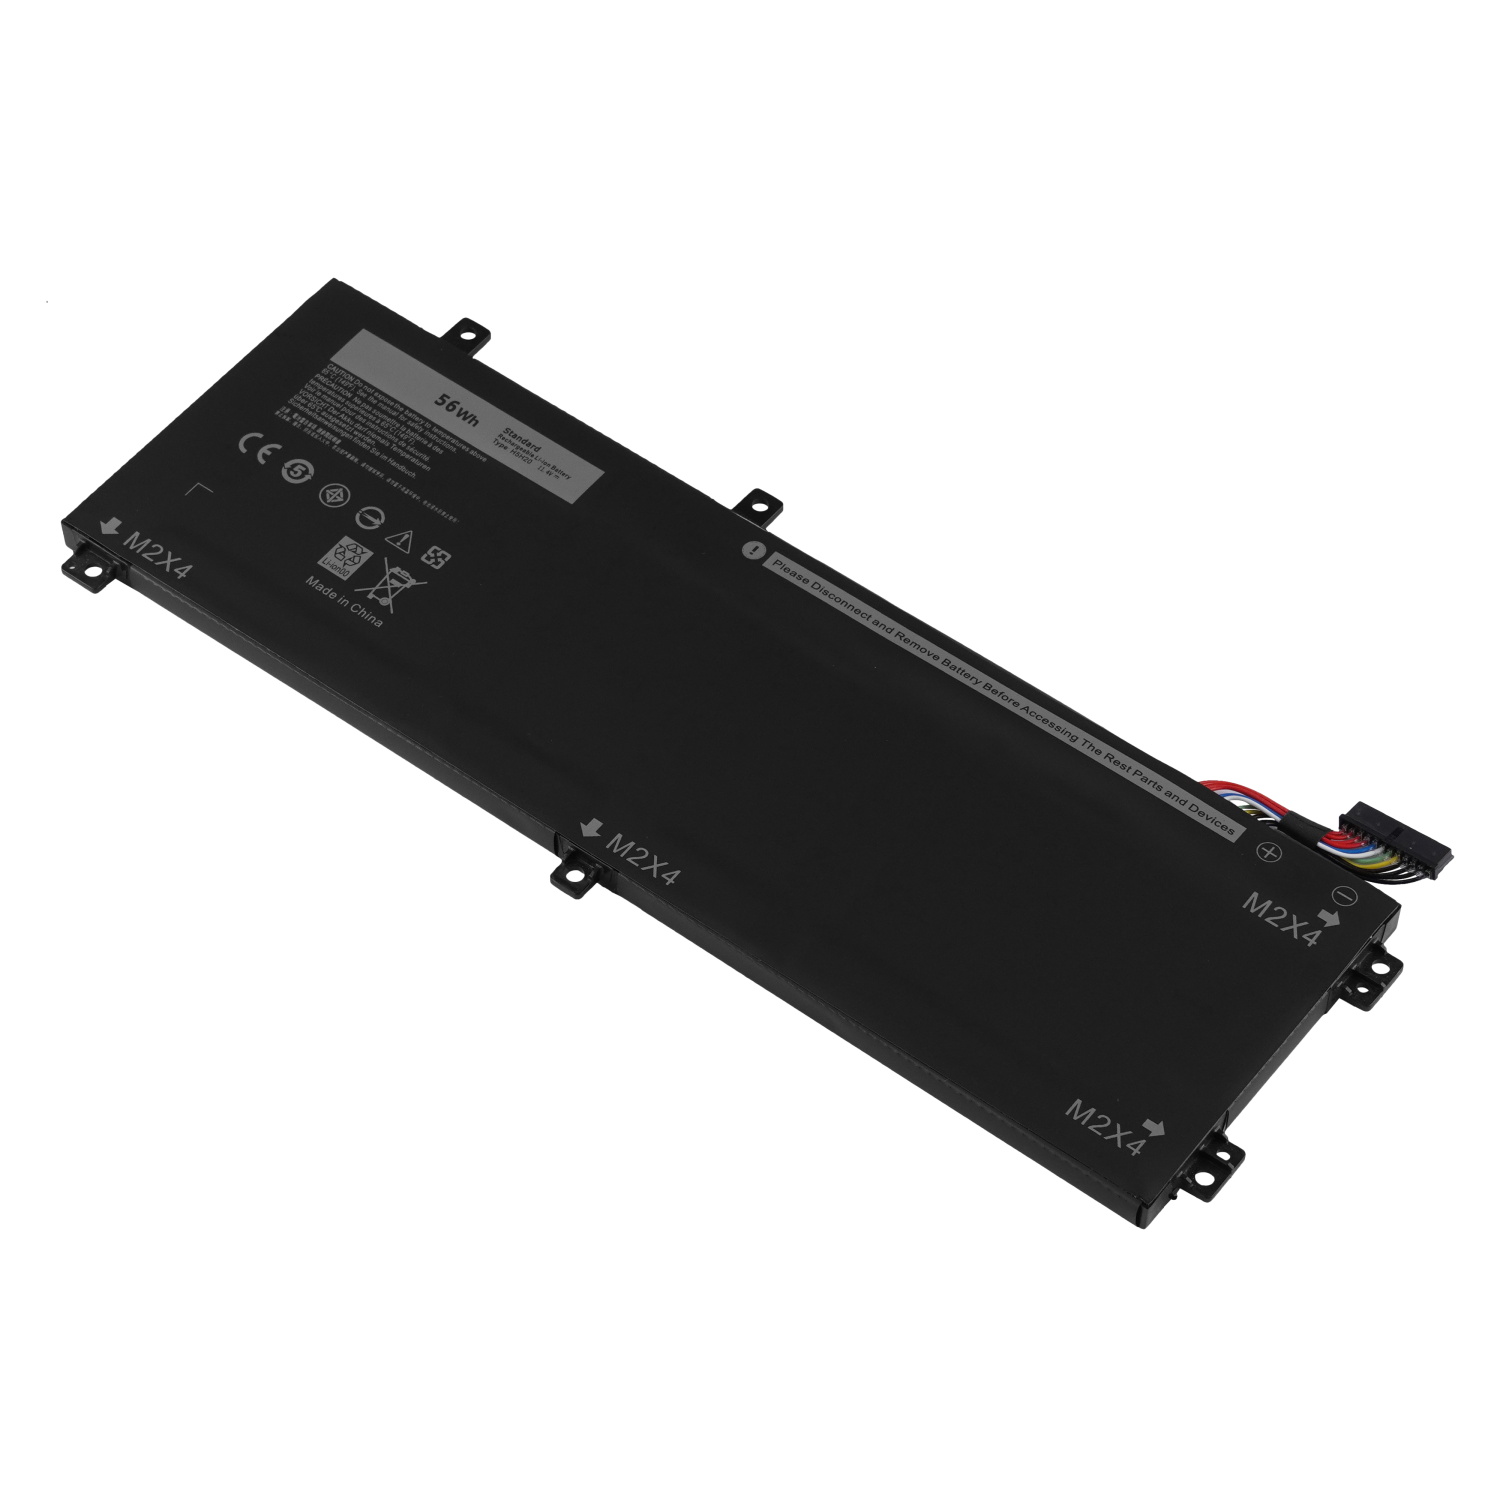 H5H20 11.4V 55Wh 4820mAh Replacement lithium ion laptop battery factory price For DELL Laptop XPS 15 9560 9570 1845 M5520